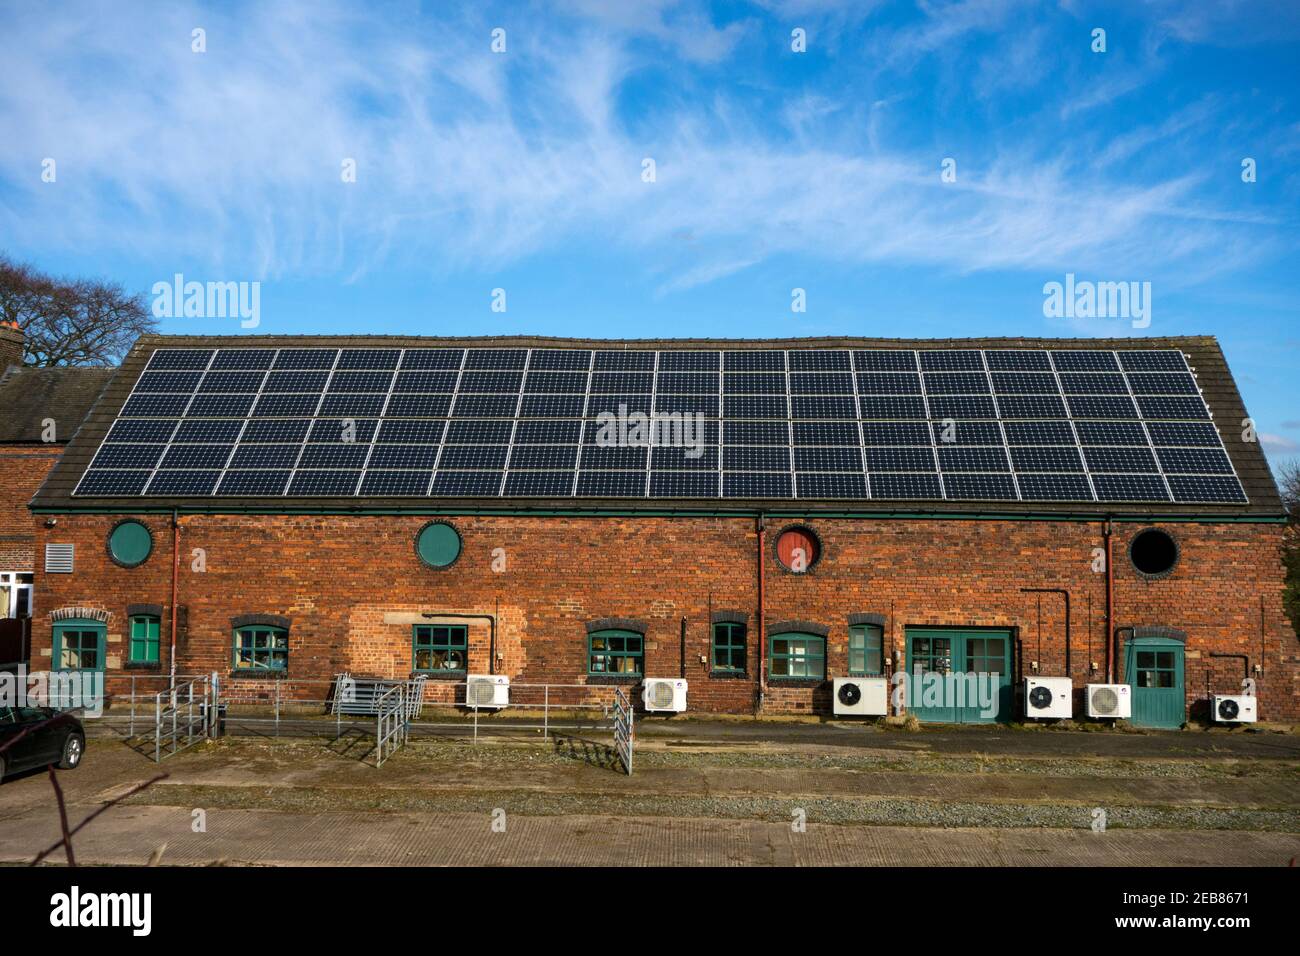 Large array of solar panels on the roof of a farm building, and air source heat pump along the wall  both using alternative green energy technology Stock Photo